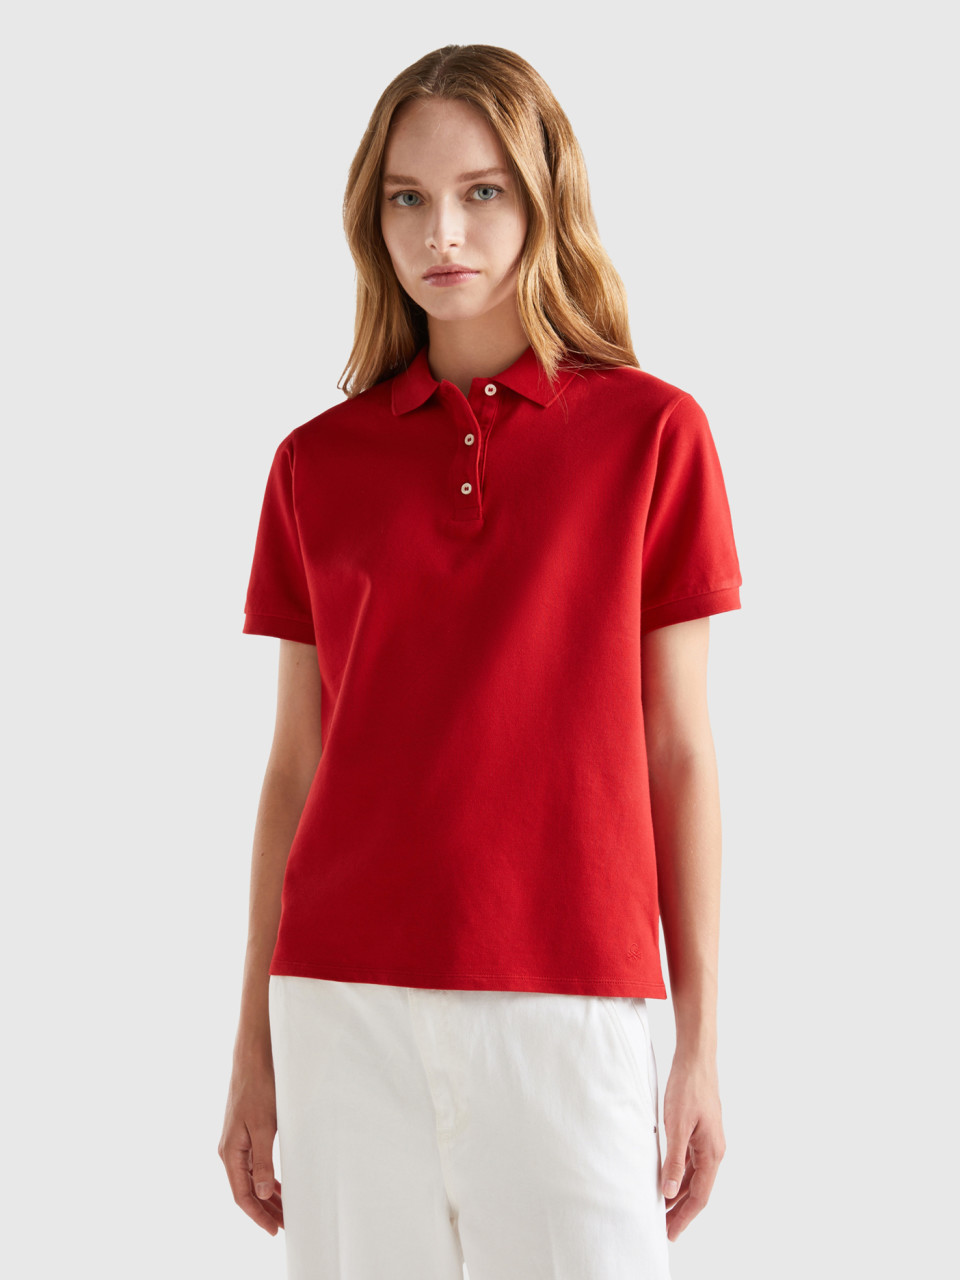 Benetton, Polo In Stretch Organic Cotton, Red, Women